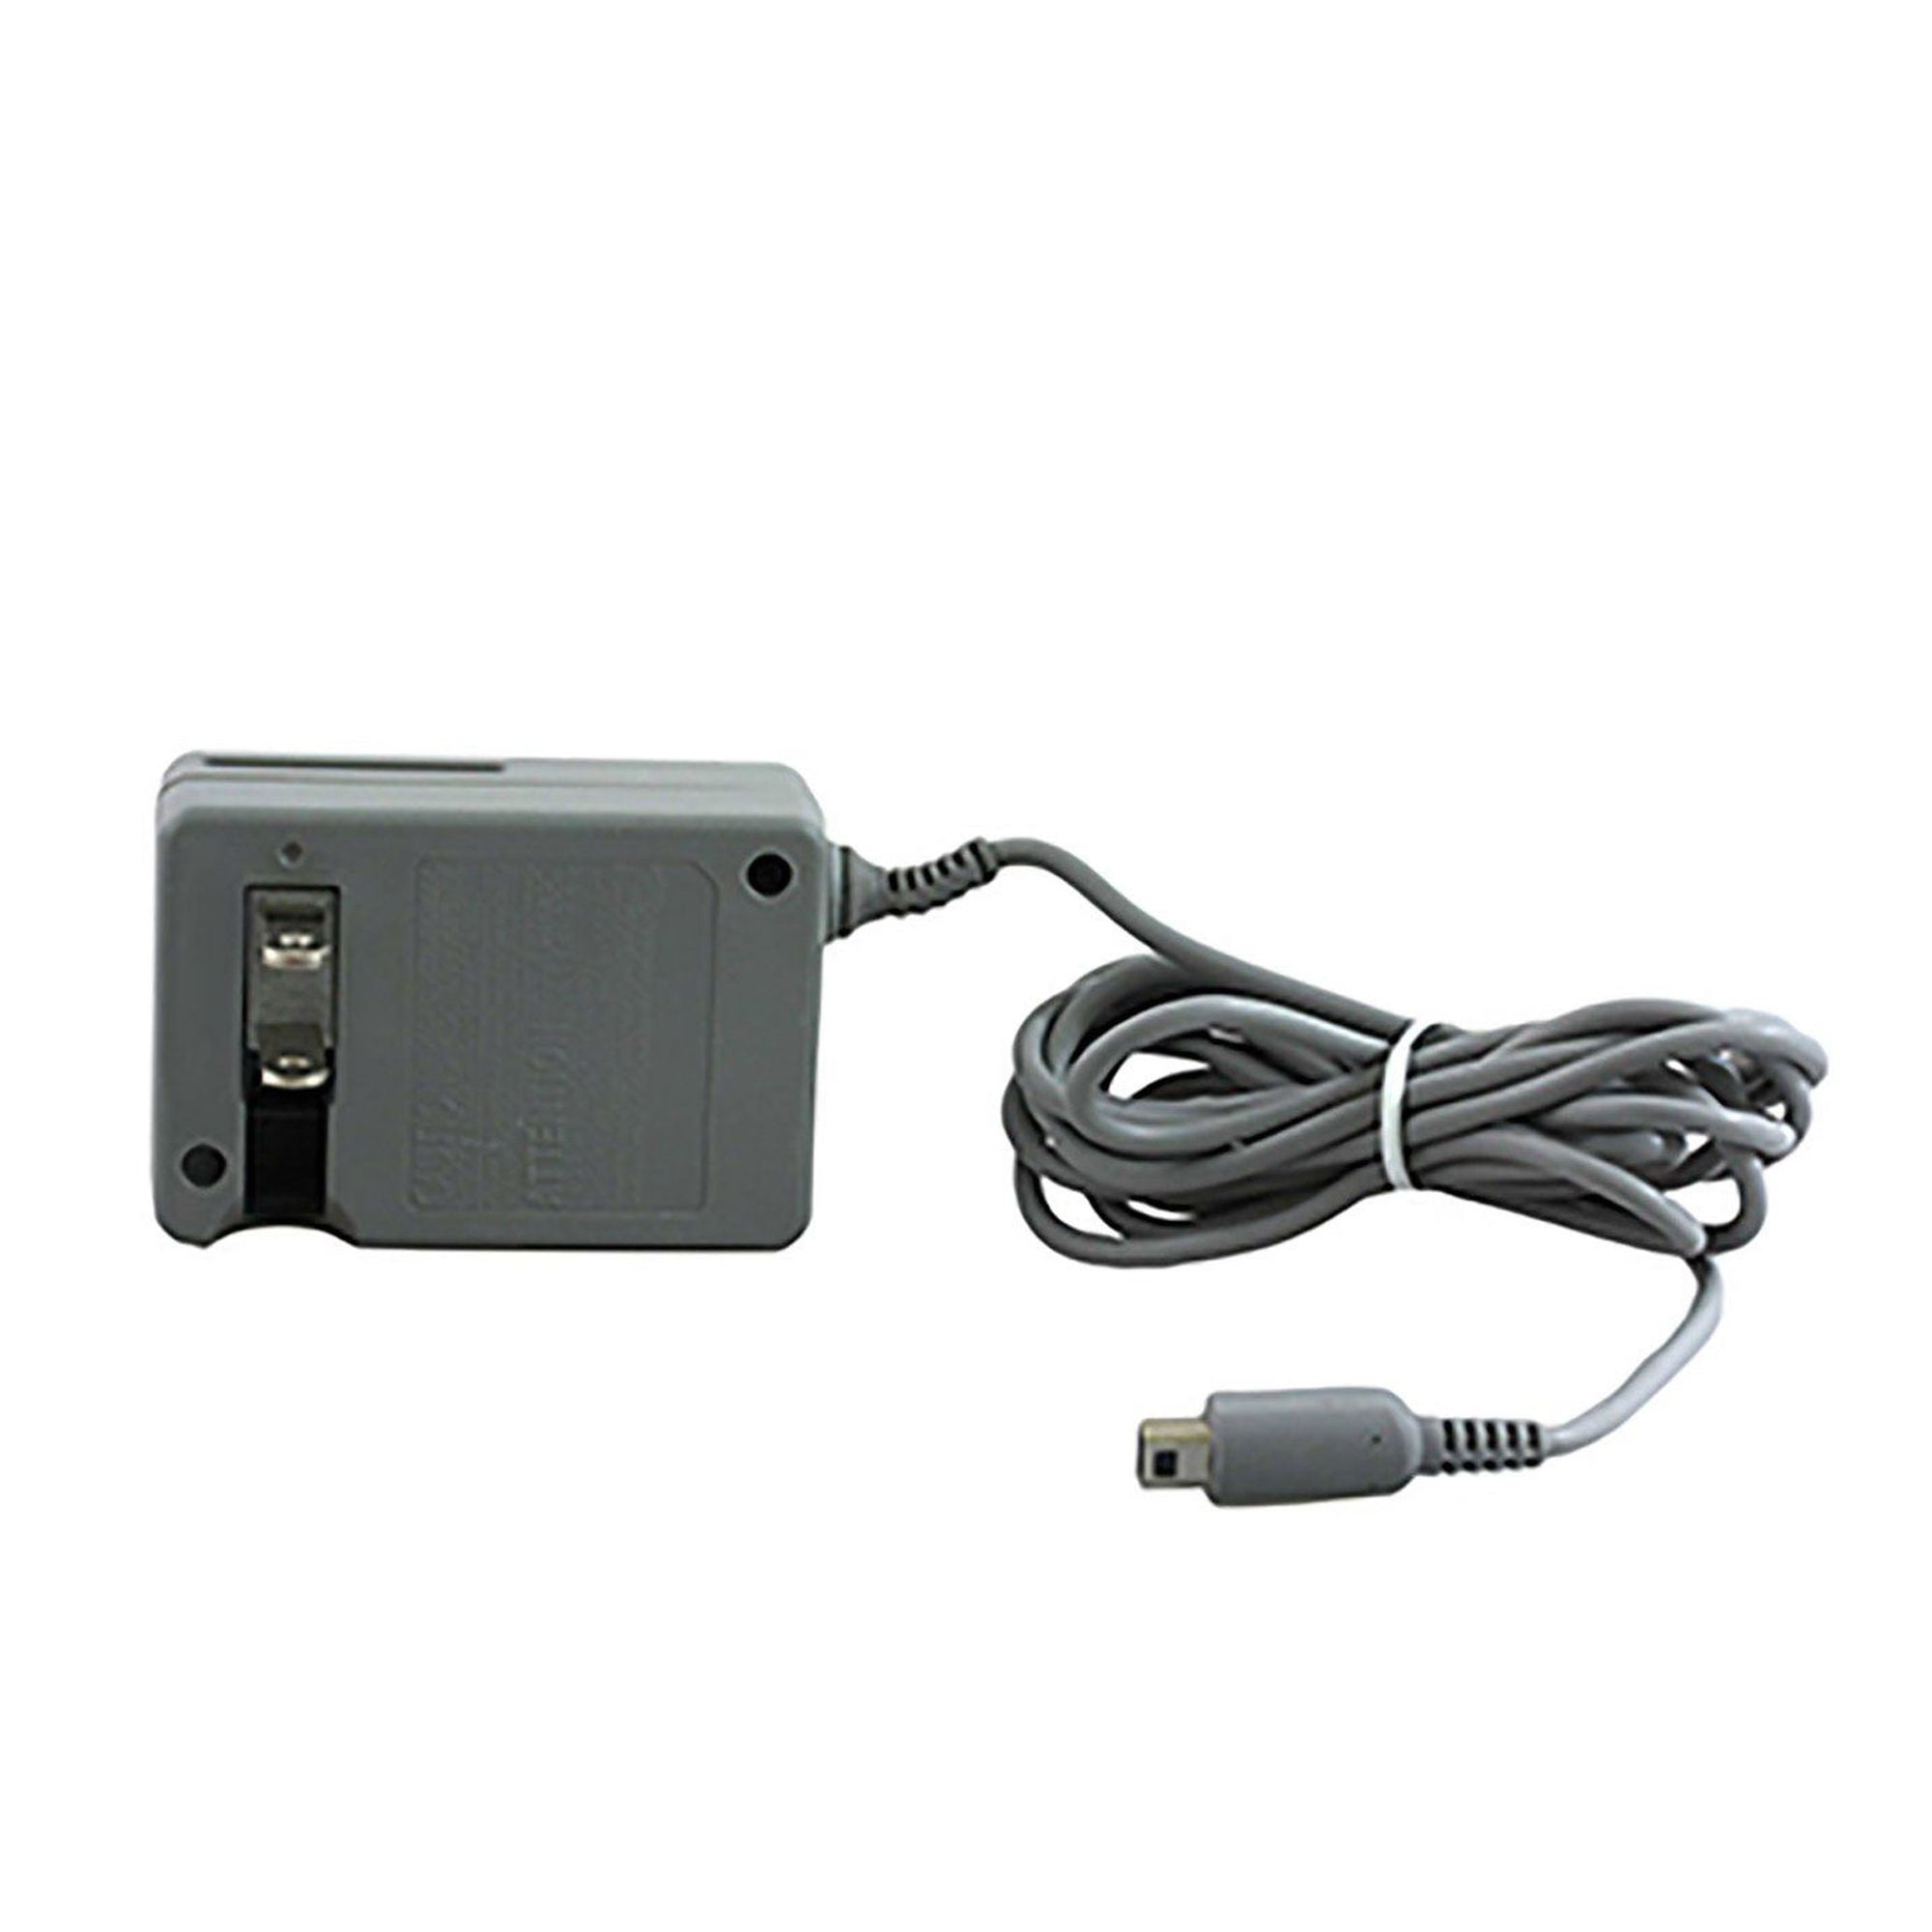 10V AC Power Charger for Nintendo New 3DS XL/3DS/DSi/DSi XL -